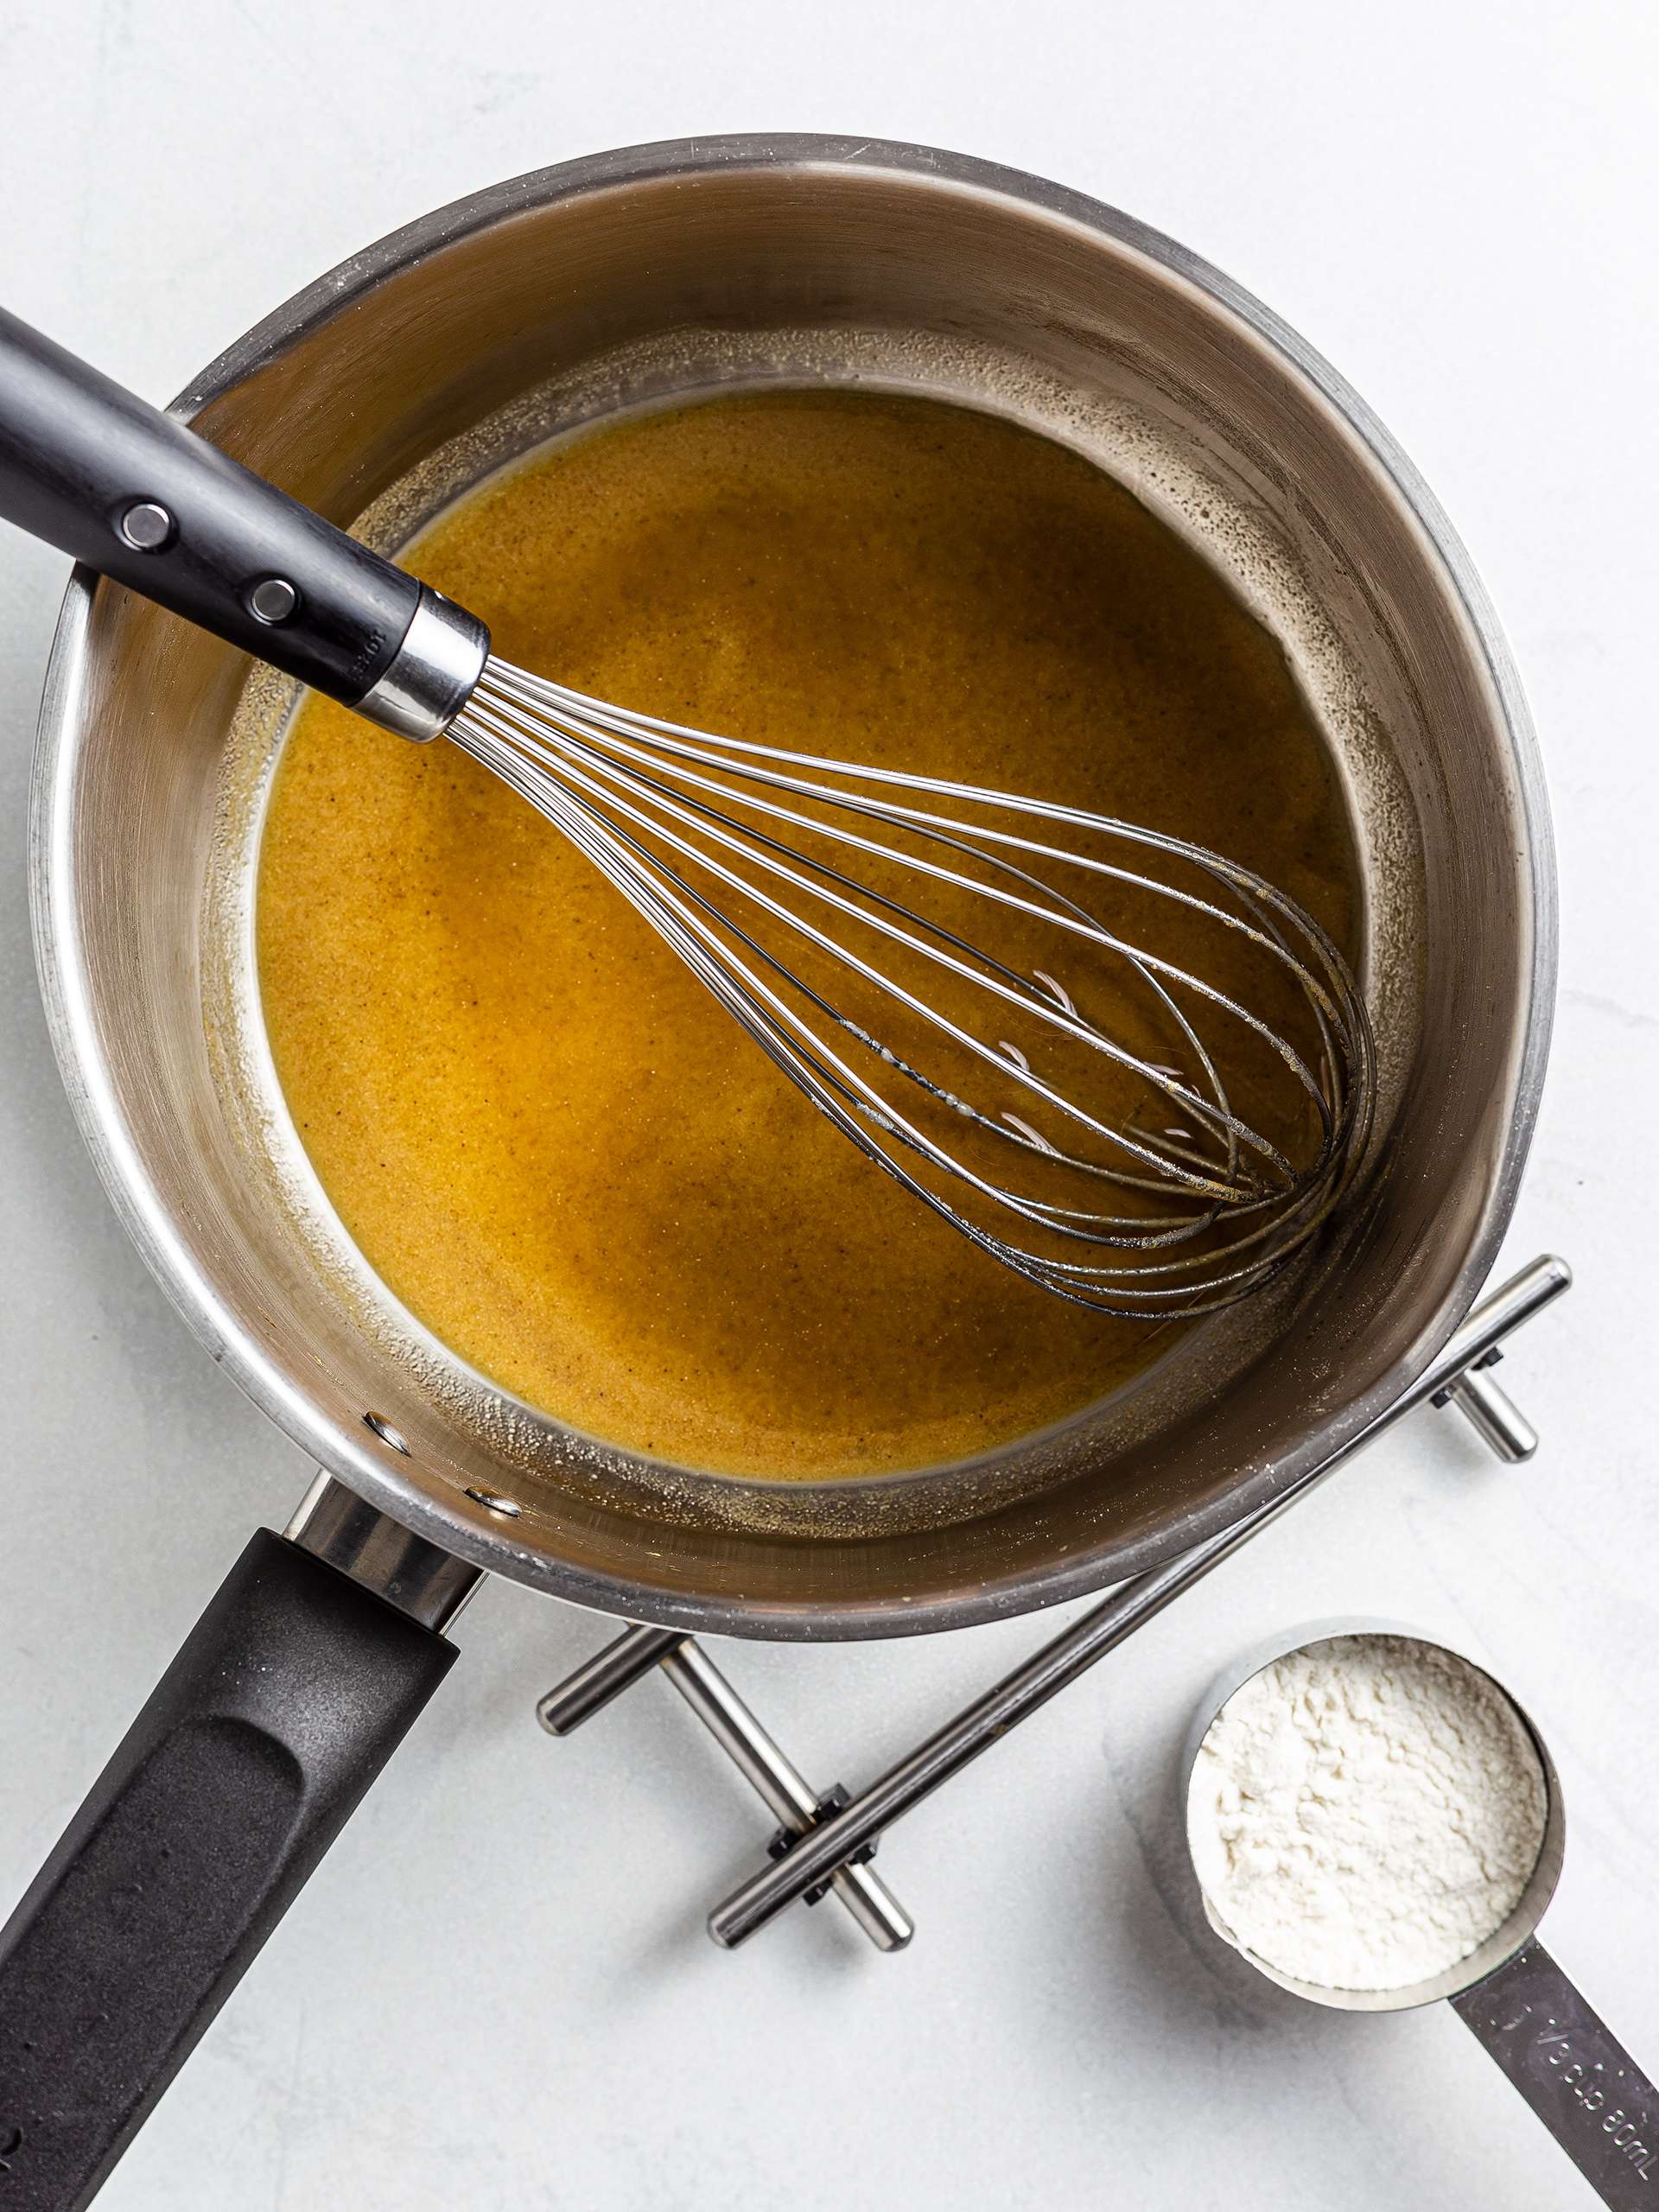 Roux made with gluten-free rice flour